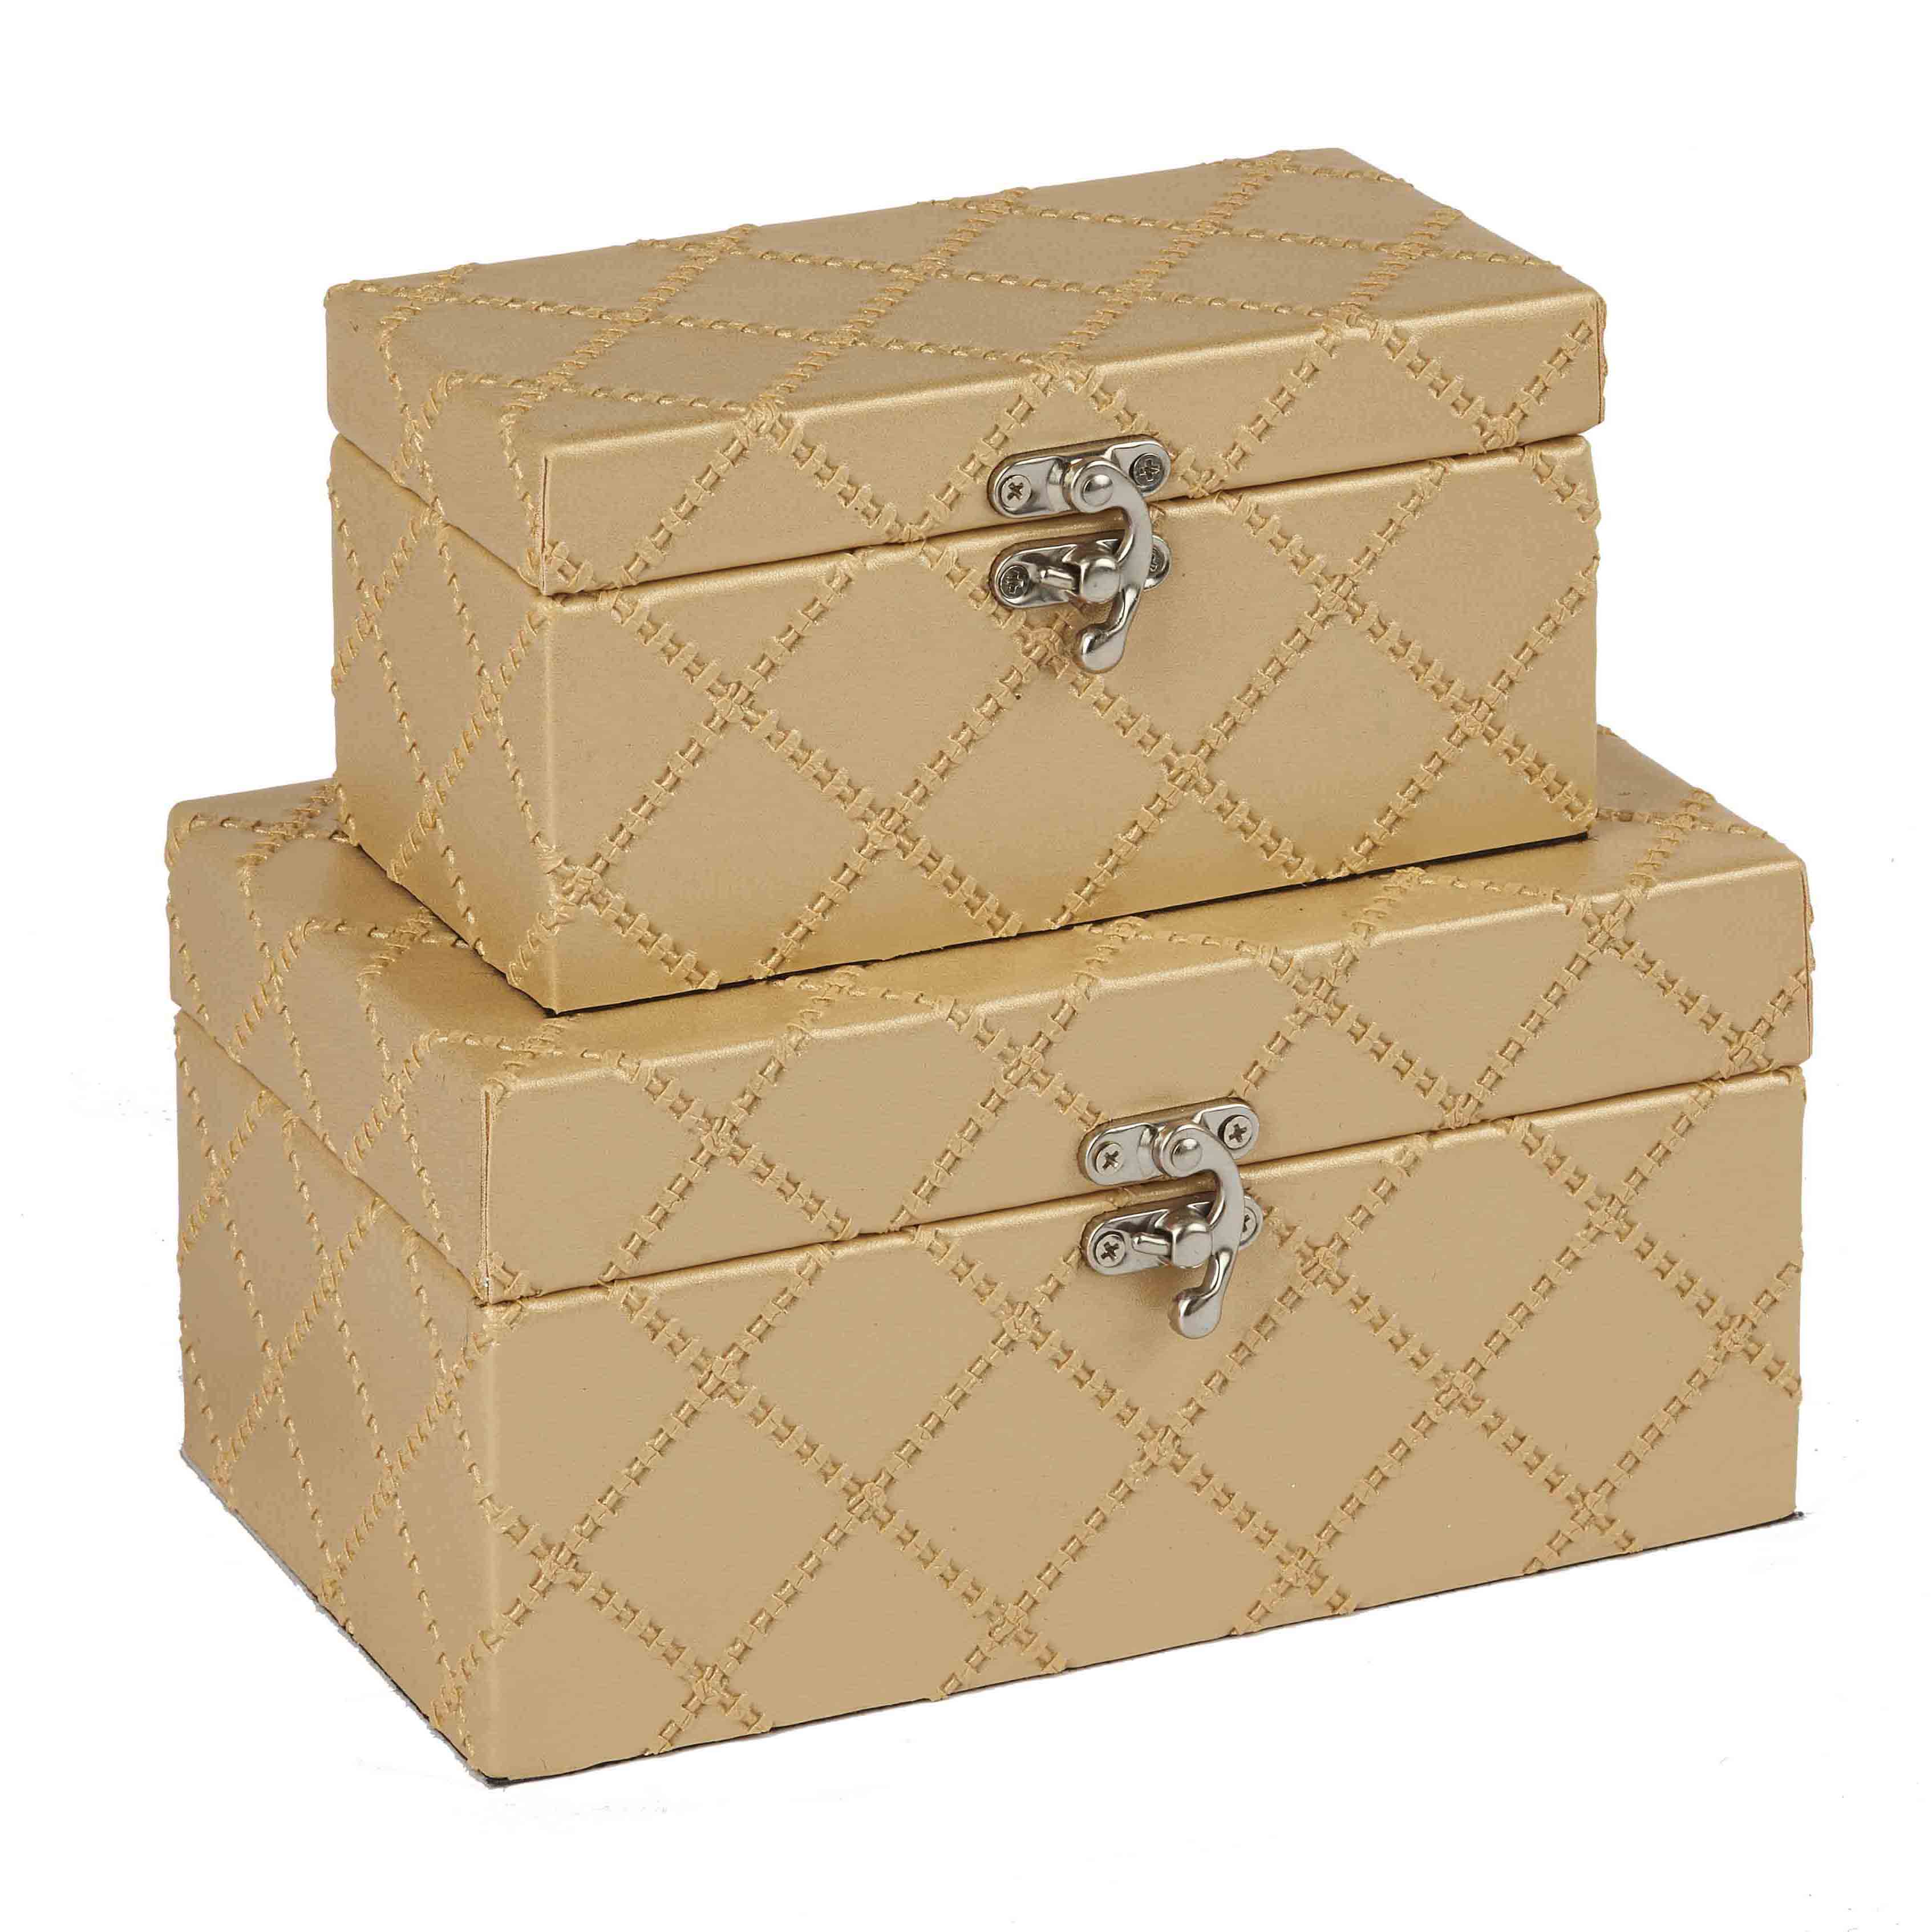 Checked Crafted PU Boxes Wholesale